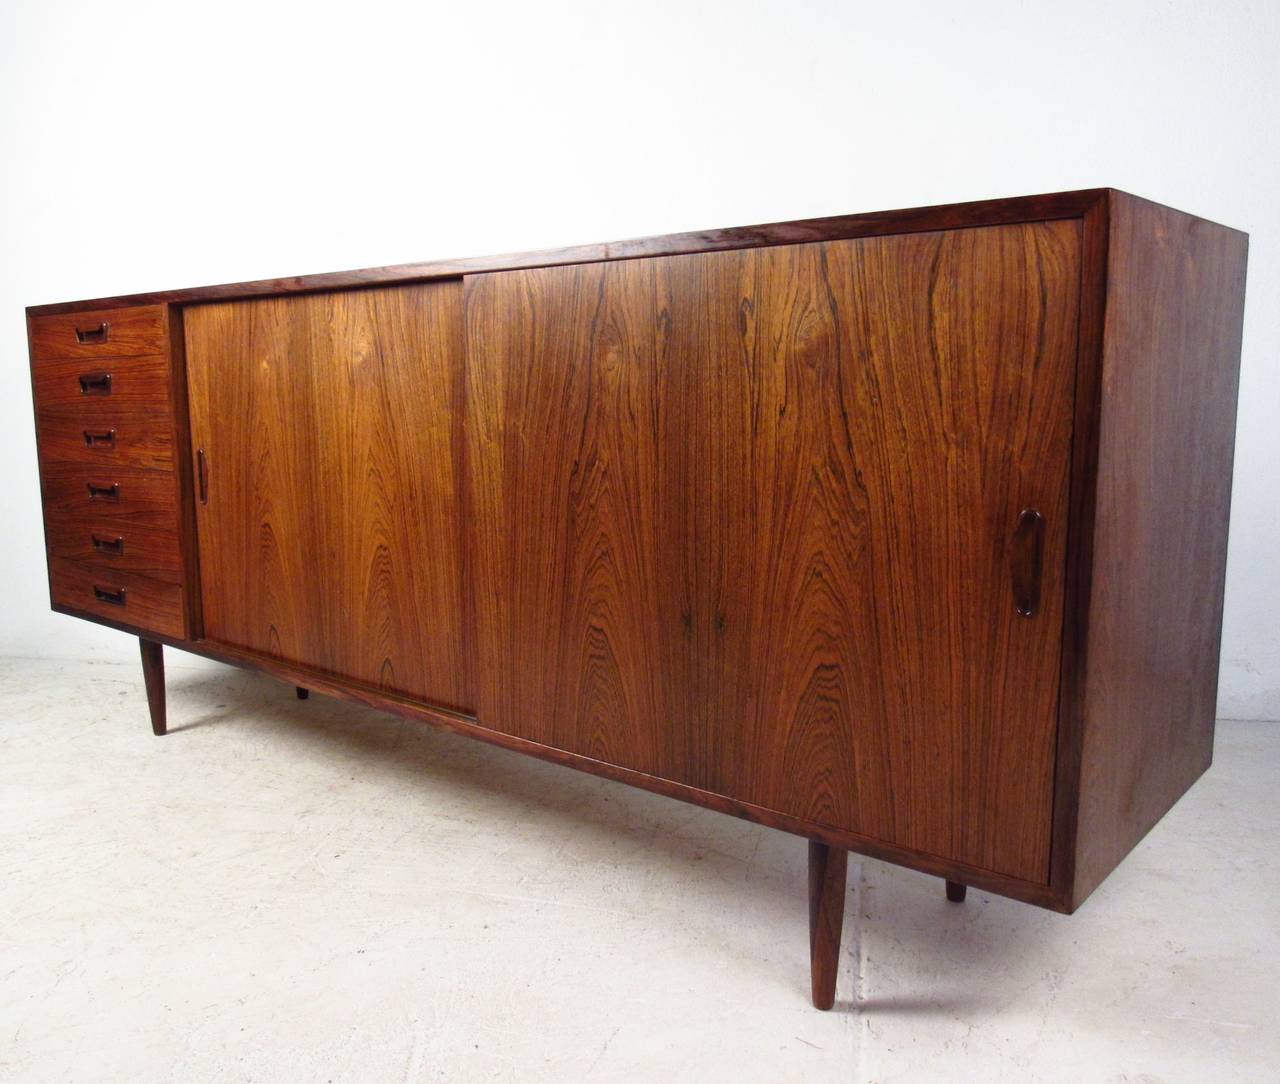 This sliding door sideboard is uniquely sized for smaller serving areas, yet offers plenty of space for storage. Vintage rosewood finish is visually stunning, while carved drawer pulls & tapered legs add to it's appeal. Please confirm item location